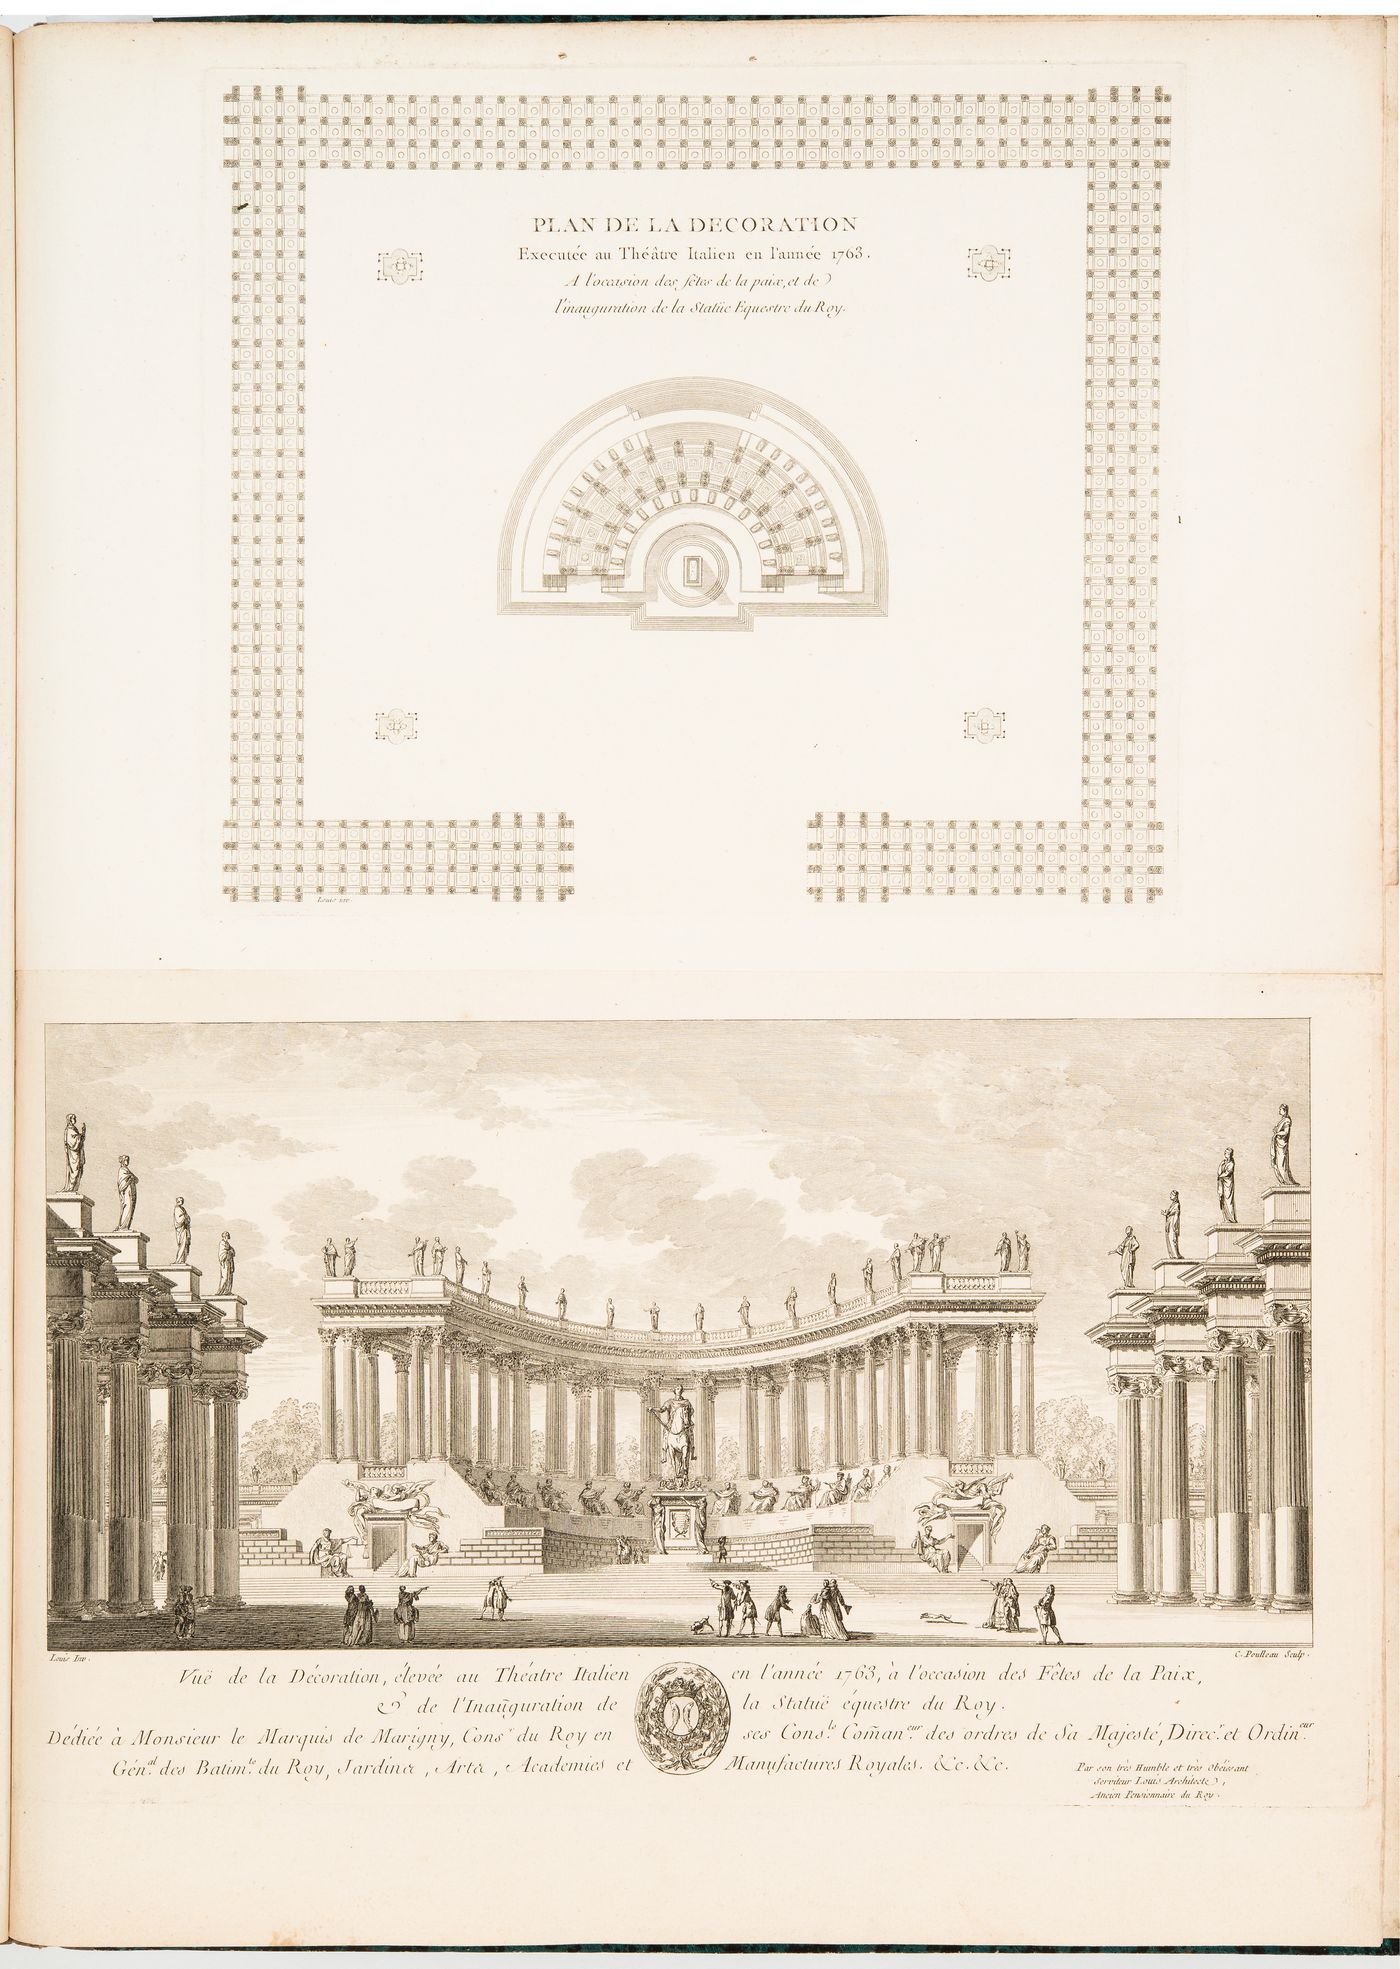 Decorations for the Théâtre italien for the fêtes de la paix and the inauguration of the equestrian statue of Louis XV, Paris: Perspectival view